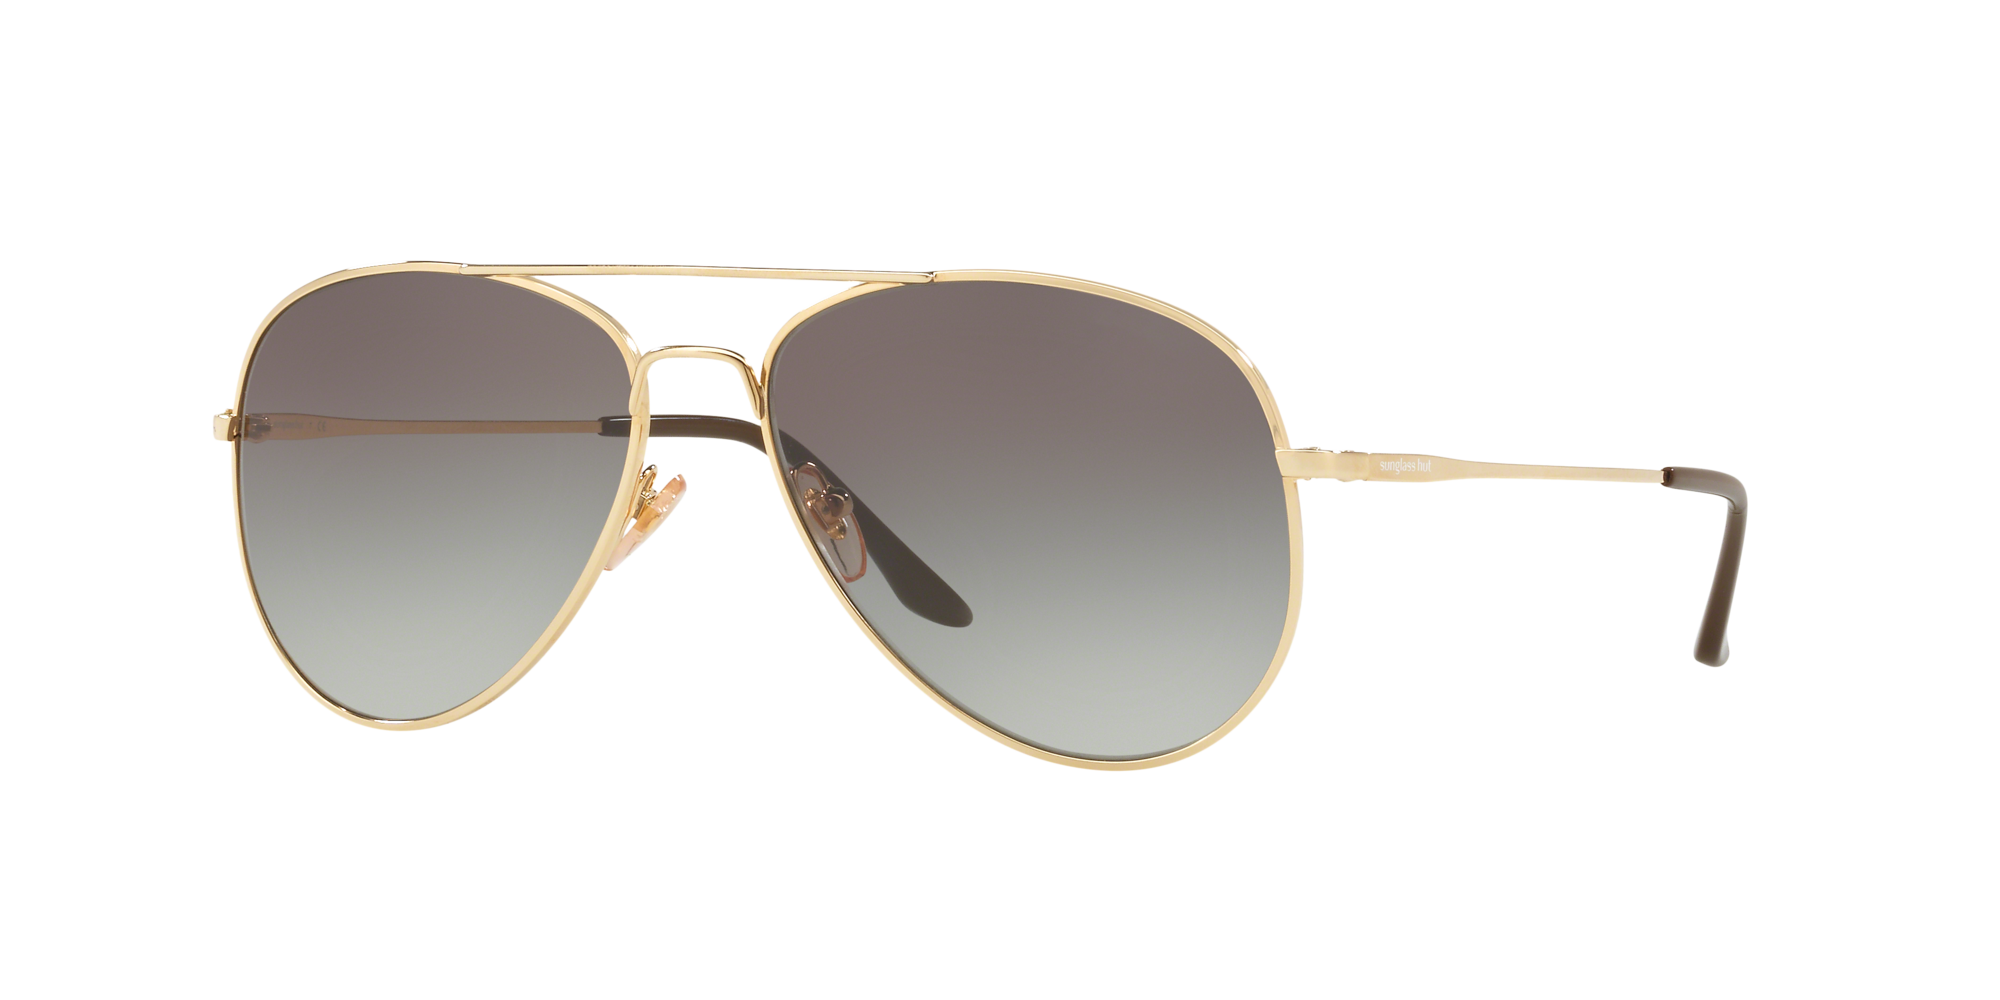 What Is the Best Place to Buy Sunglasses?